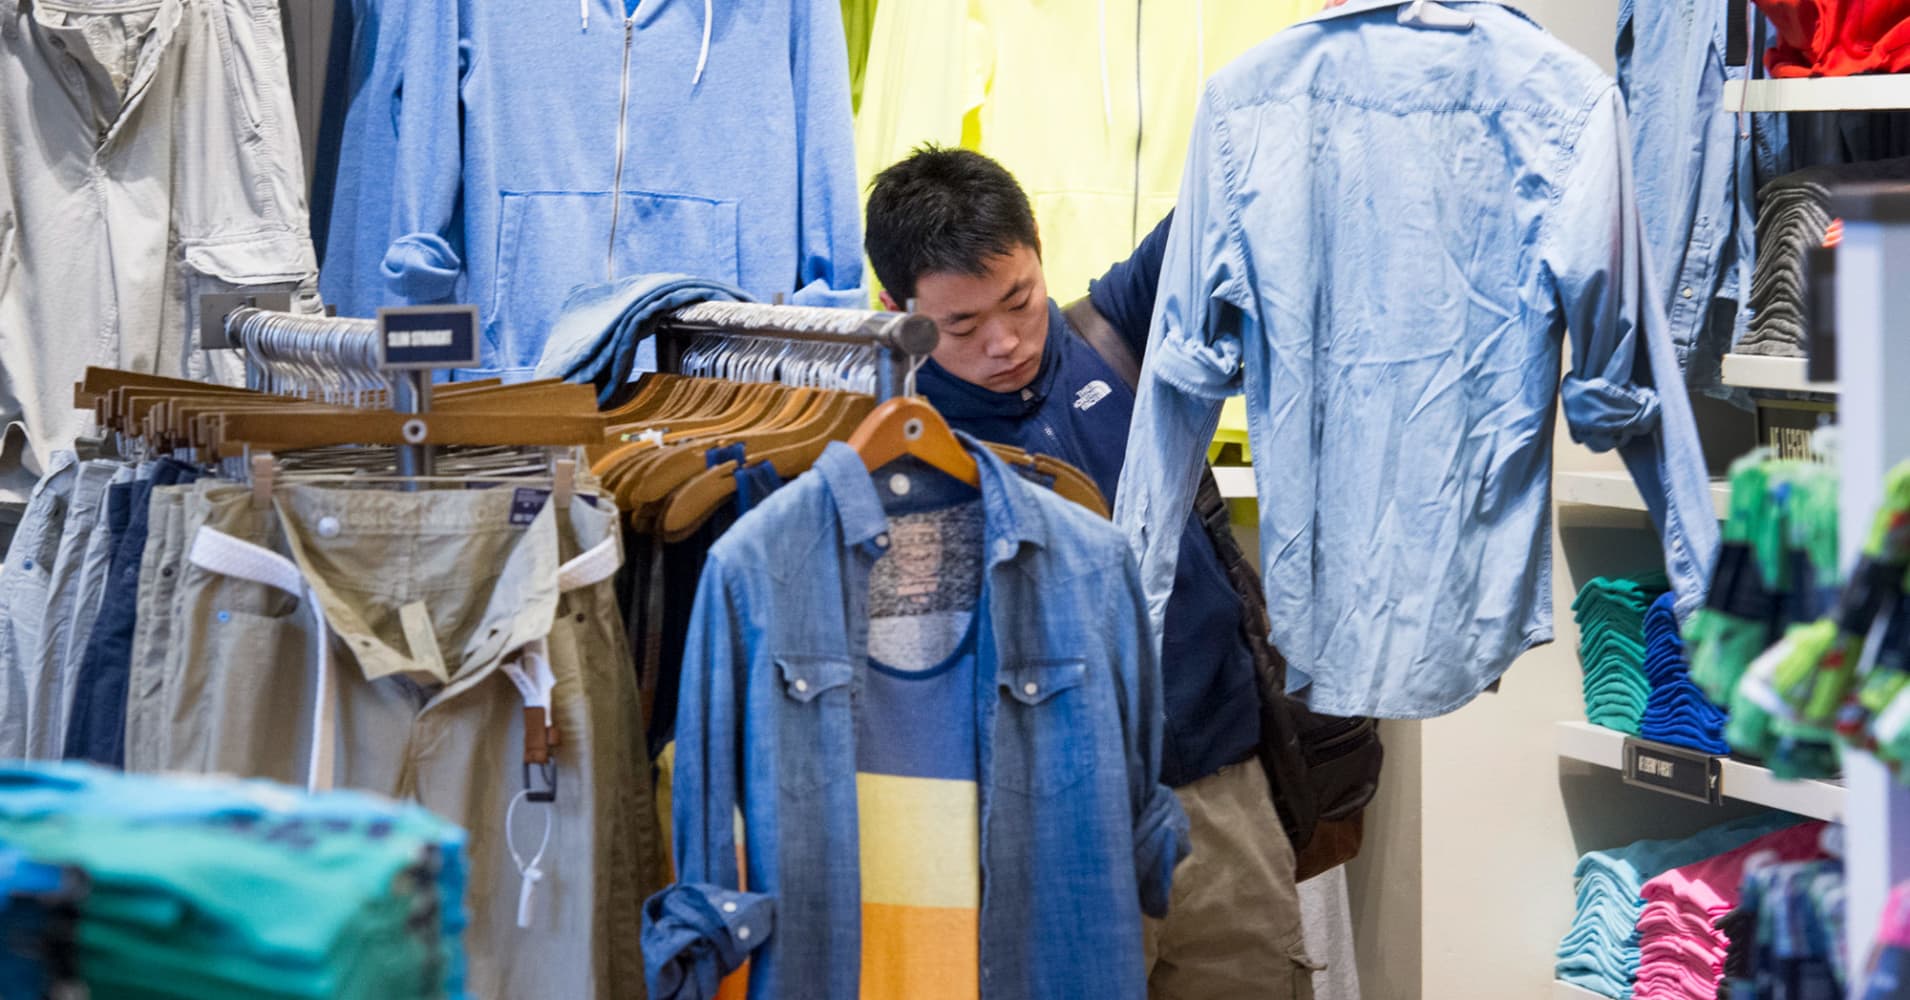 Strong retail sales report suggests robust economic growth in the second quarter